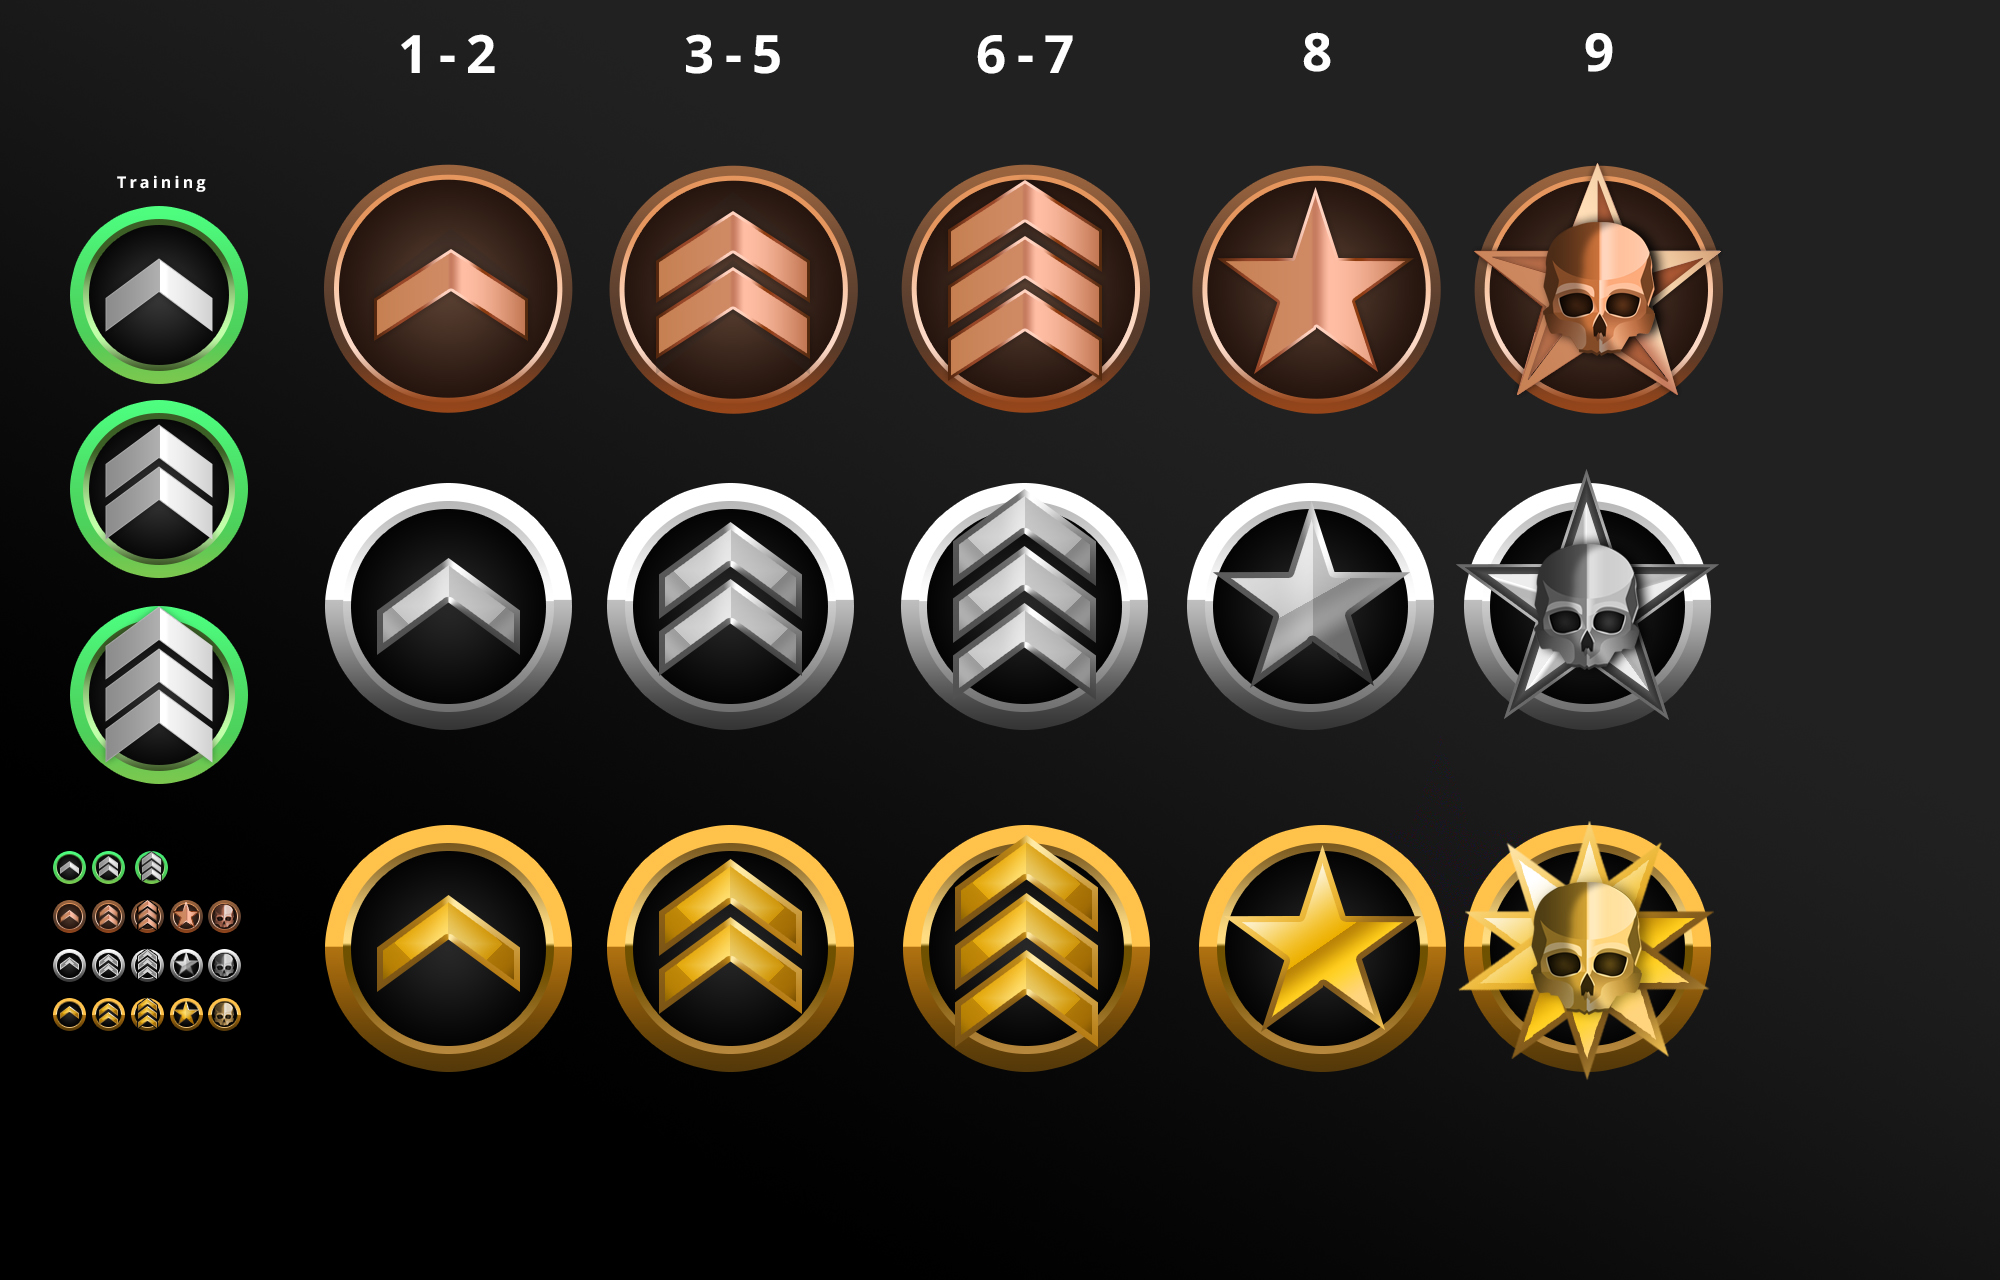 Army-rank icons | Noun Project